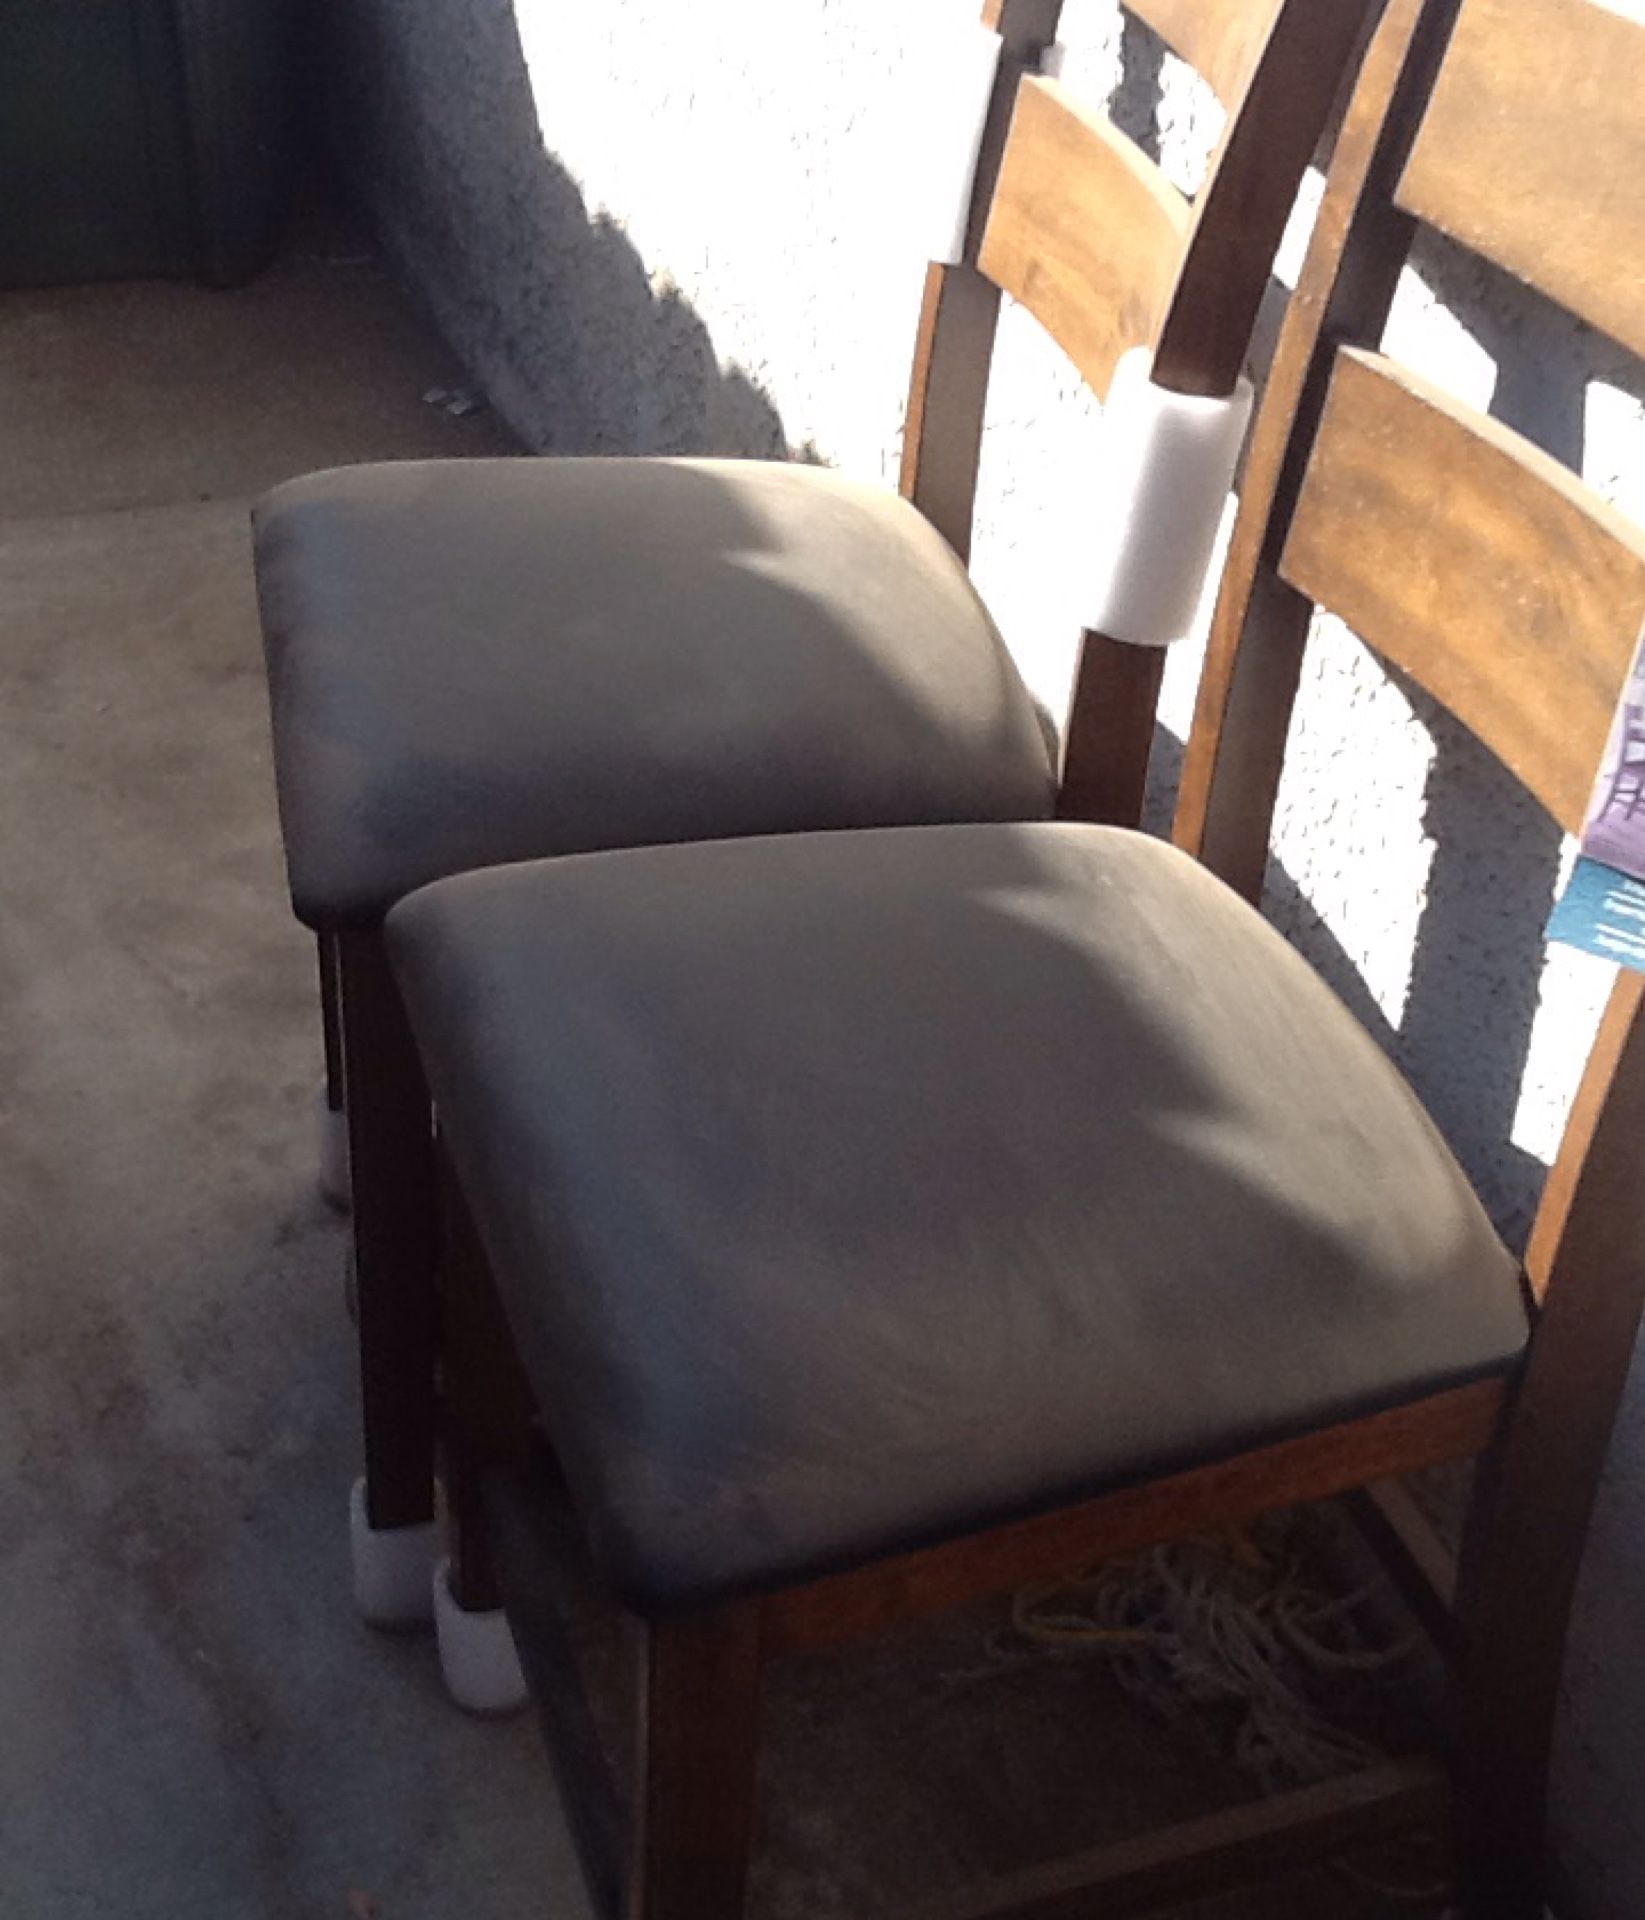 Two brand new chair